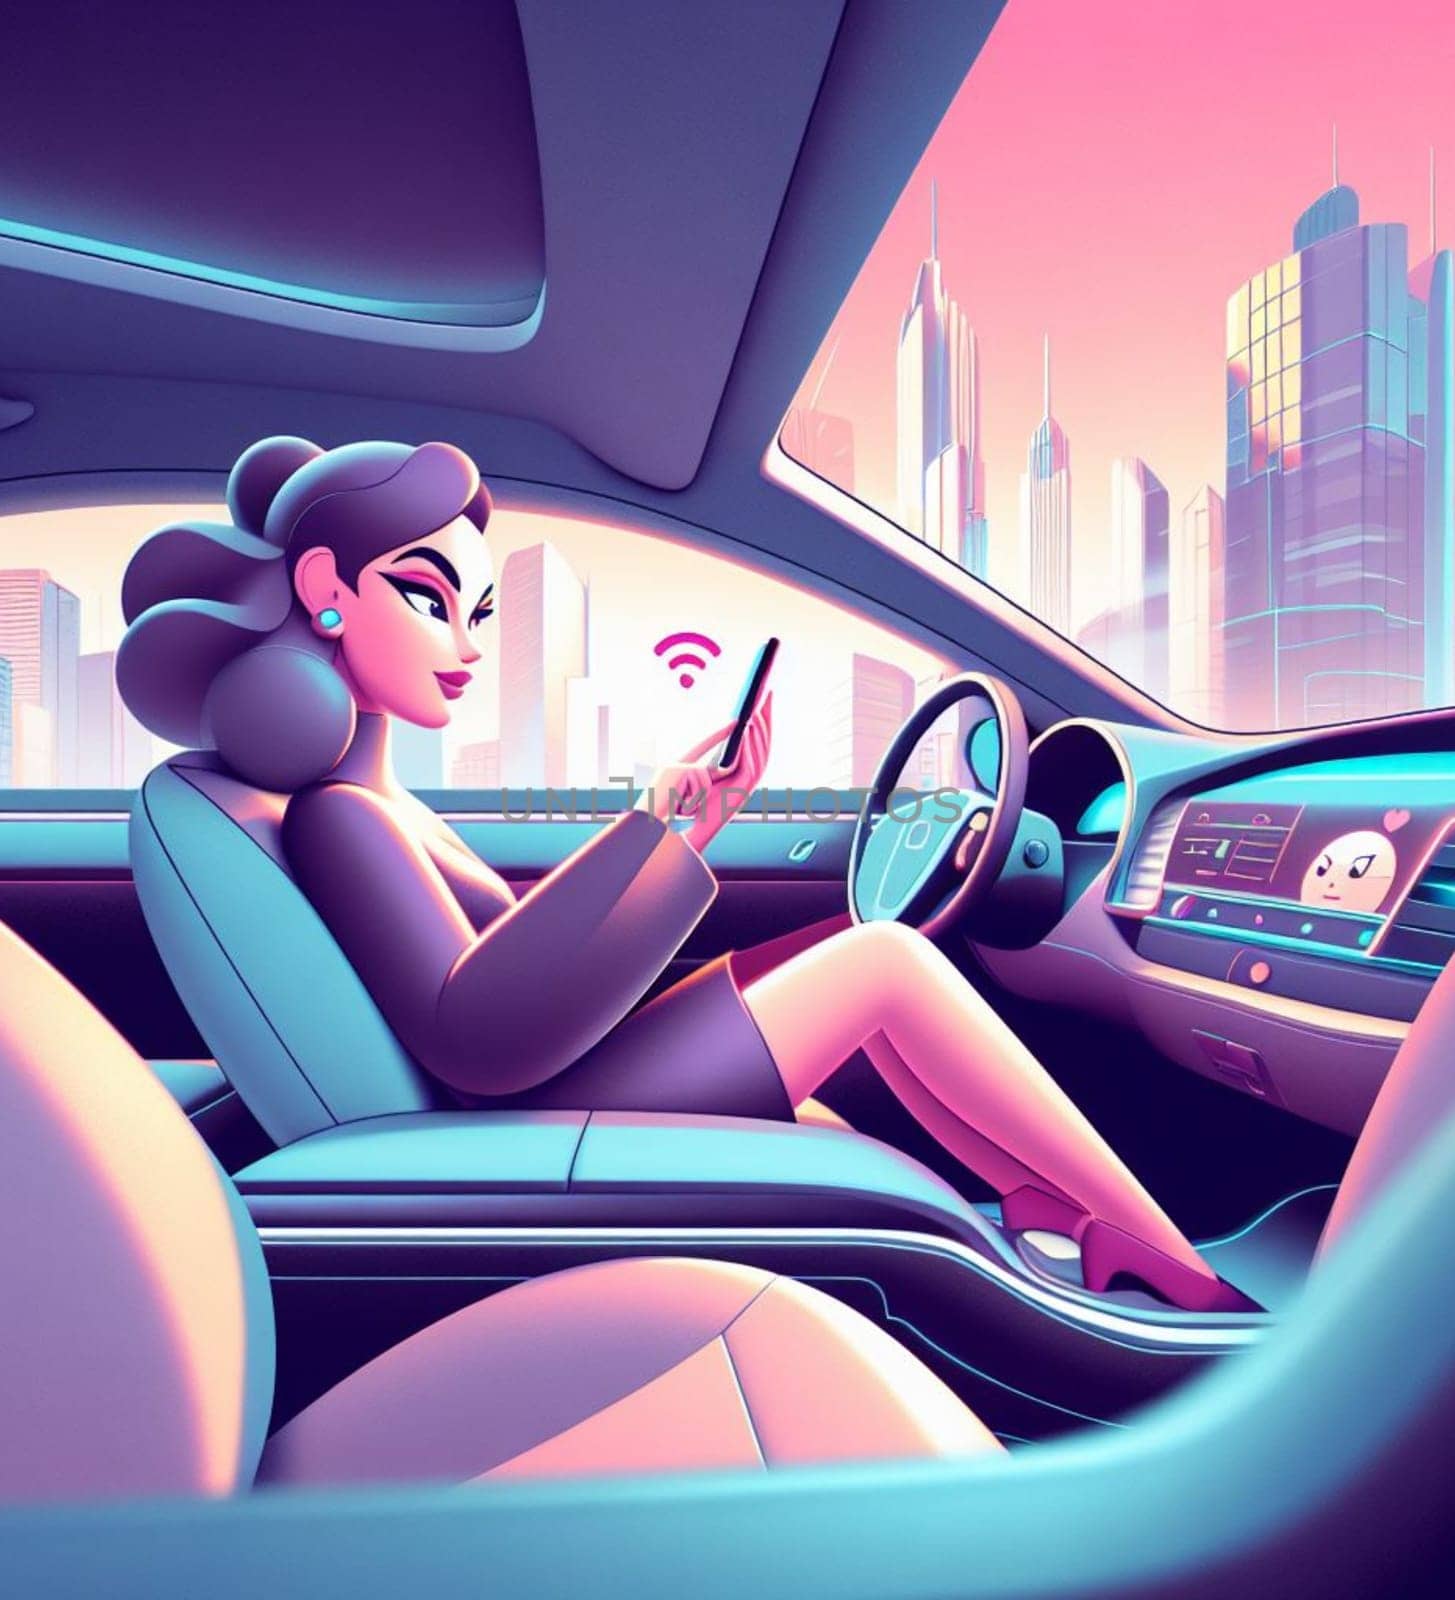 business woman manager remote working from autonomous driving ev car traveling fast in city traffic by verbano